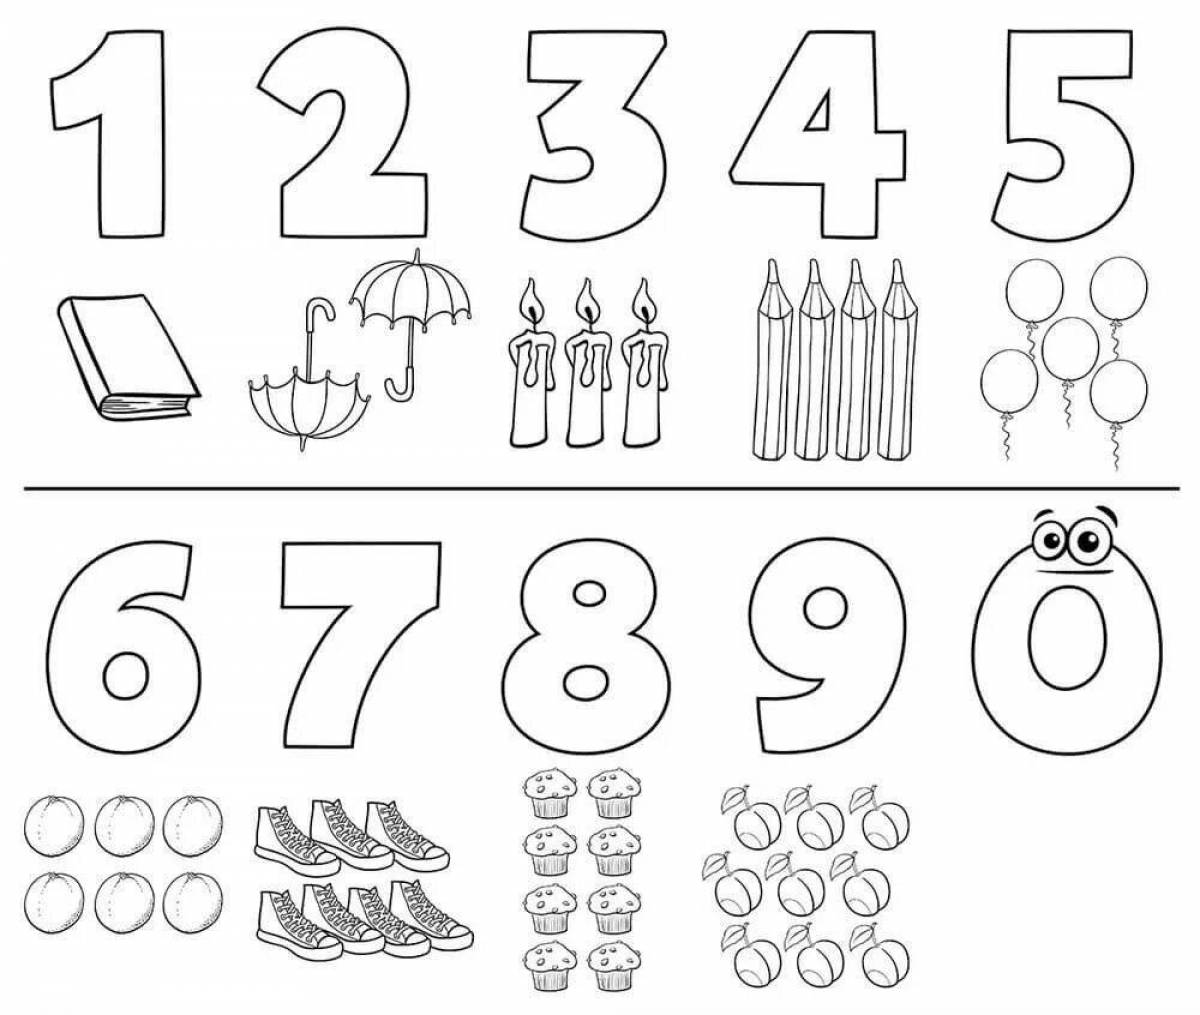 Awesome coloring page numbers up to 20